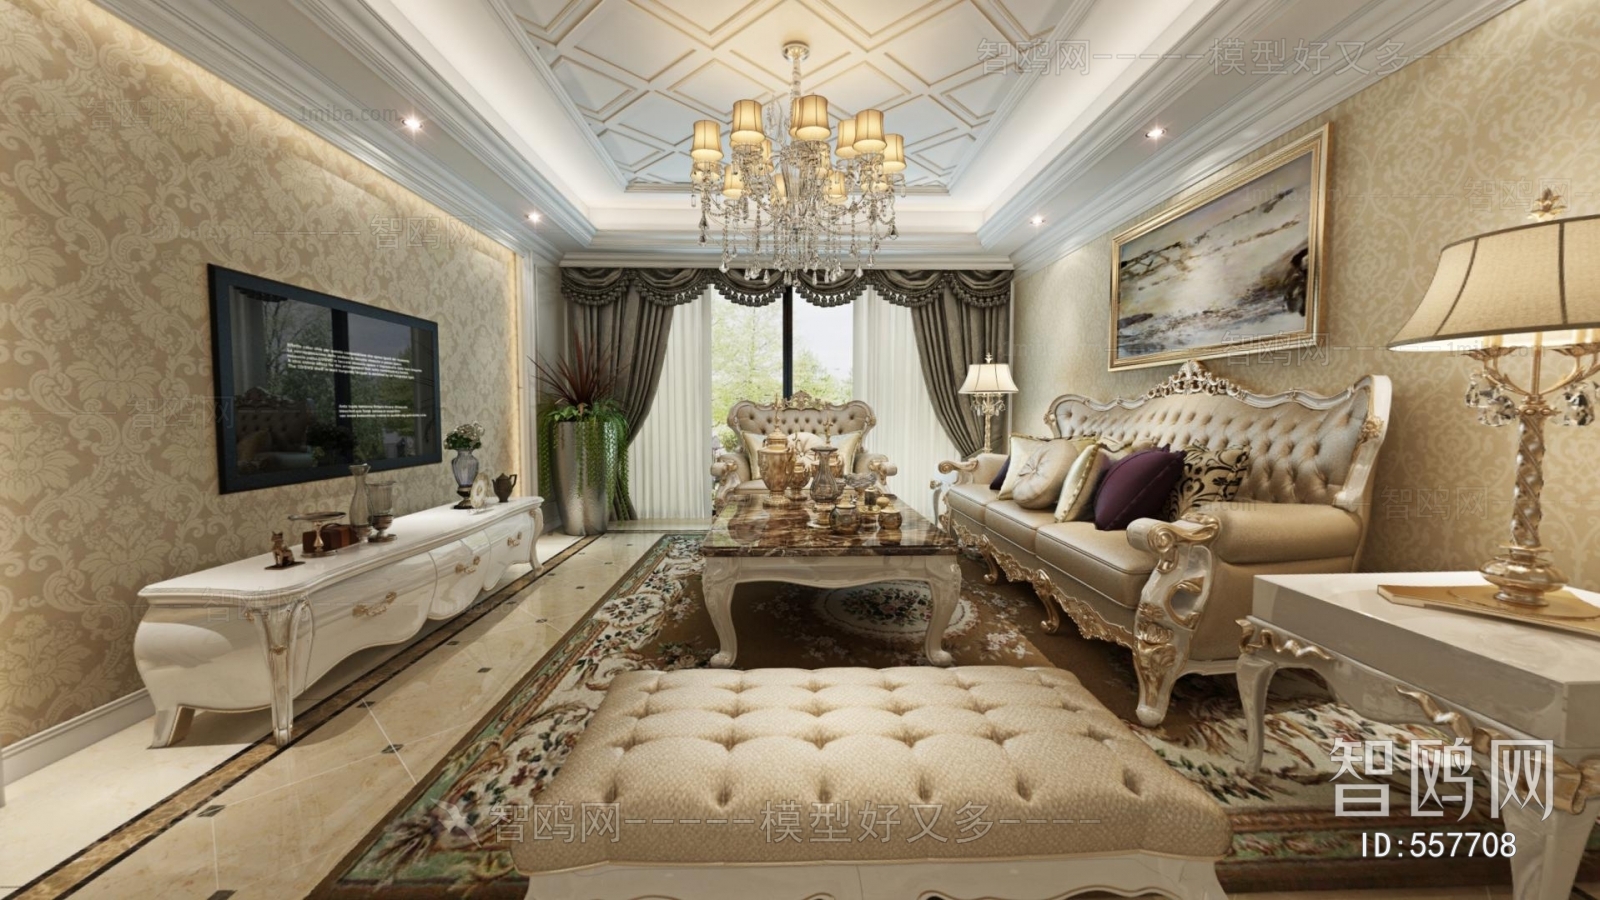 New Classical Style A Living Room